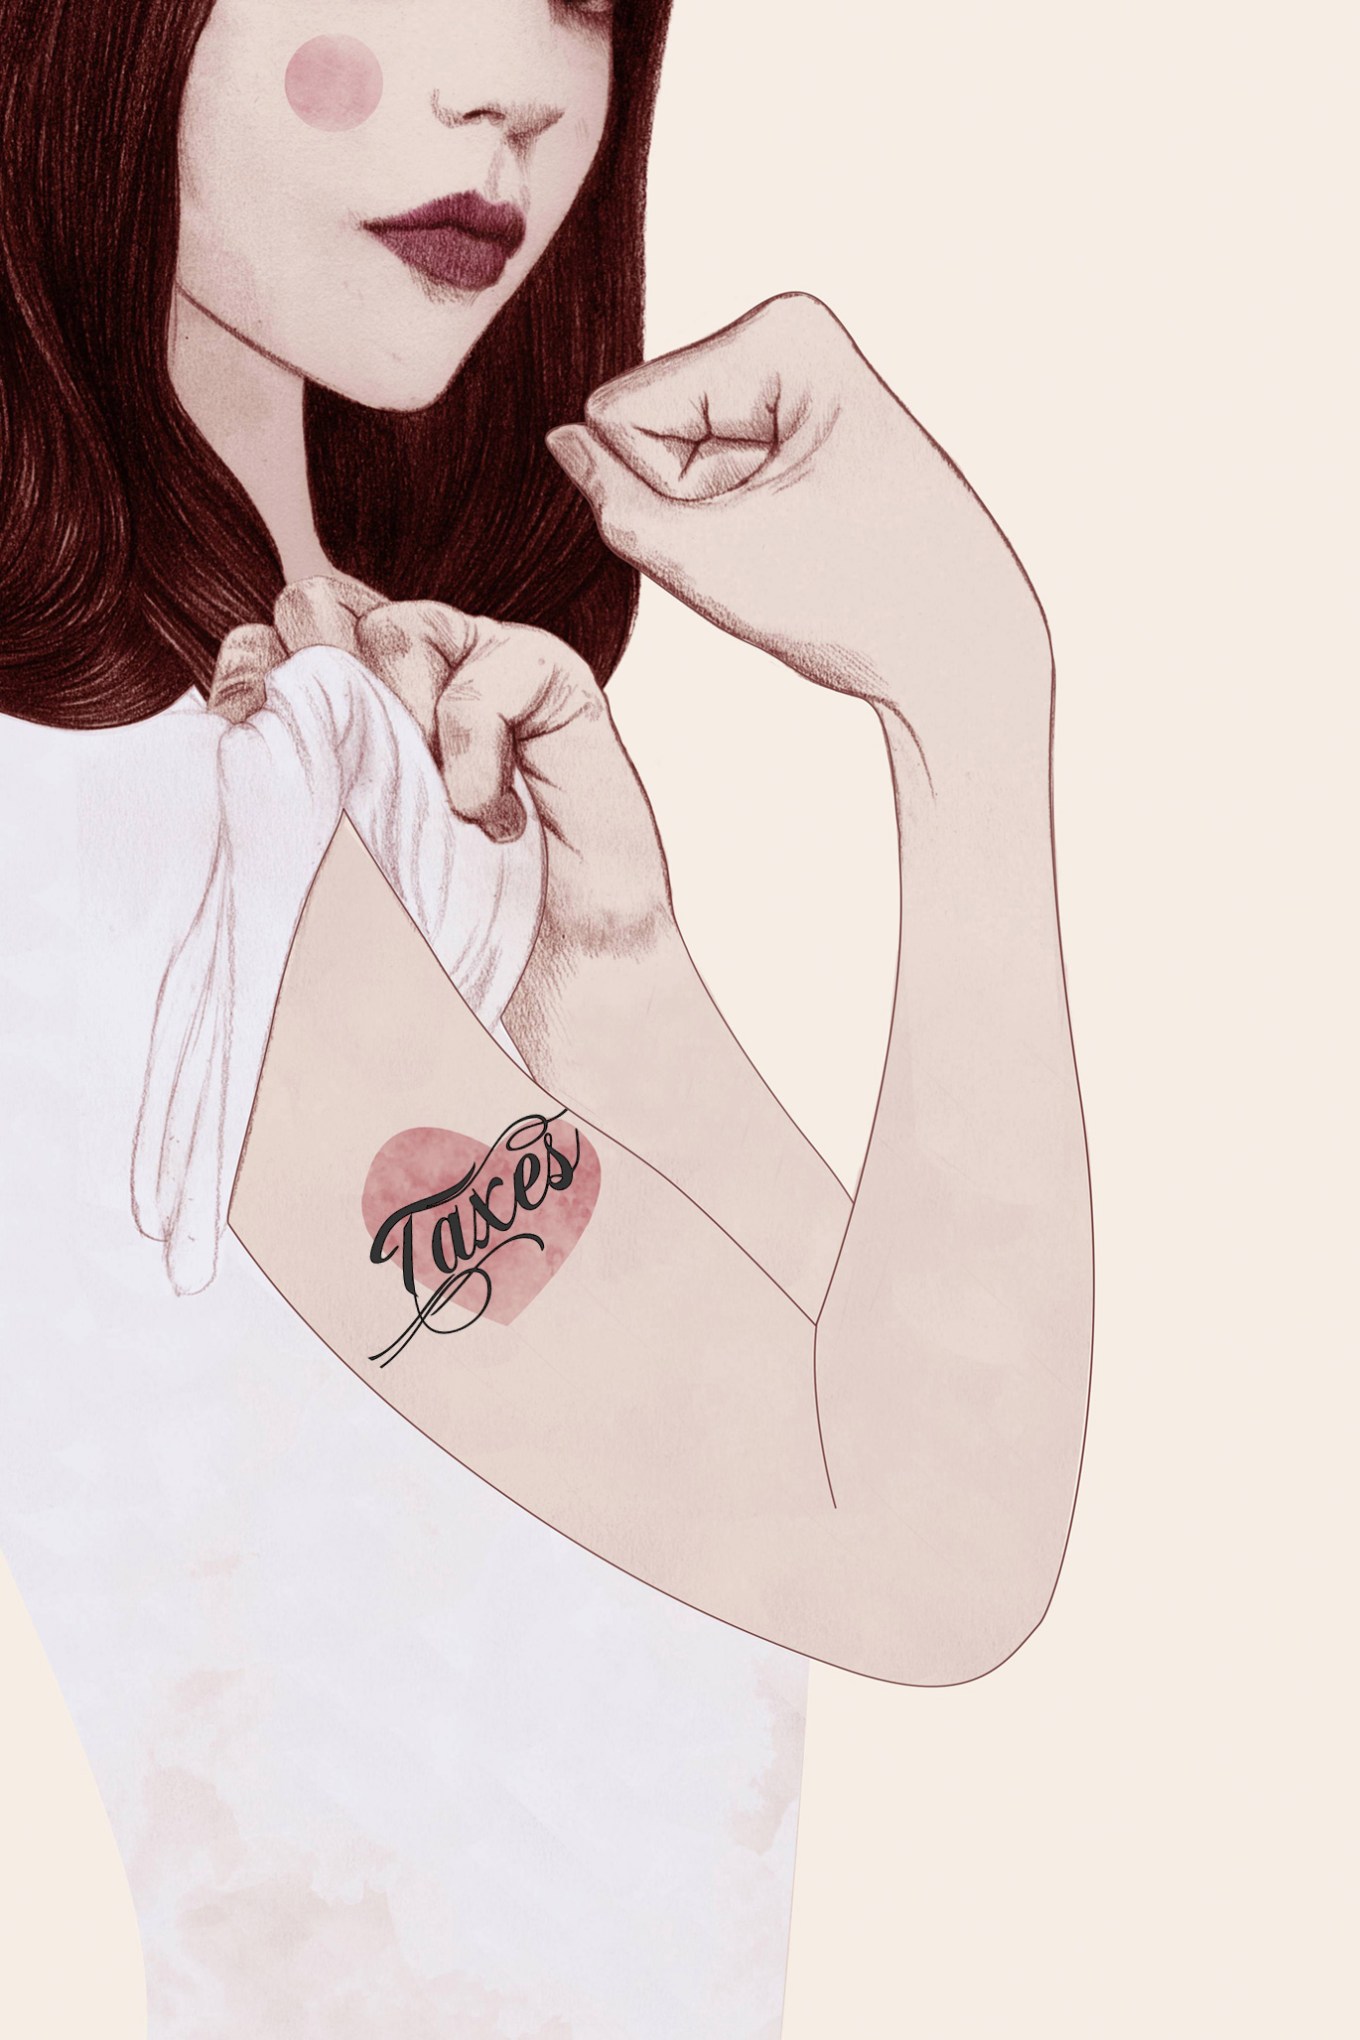 Illustration of woman with a taxes tattoo